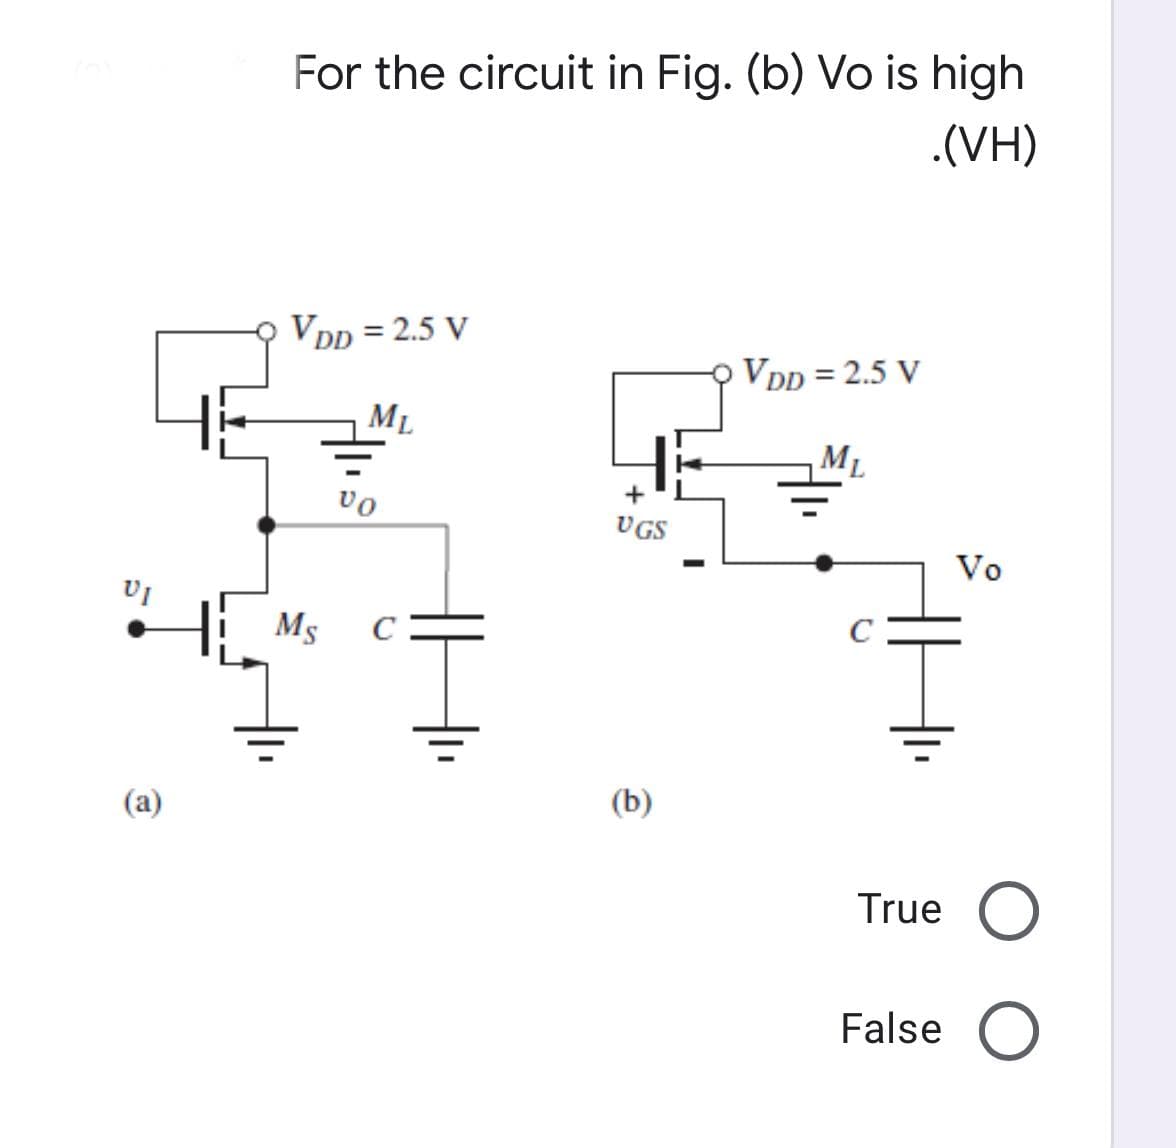 VI
(a)
For the circuit in Fig. (b) Vo is high
.(VH)
VDD = 2.5 V
VDD = 2.5 V
ML
ML
Vo
Ms C
Ī
UGS
(b)
Vo
True O
False O